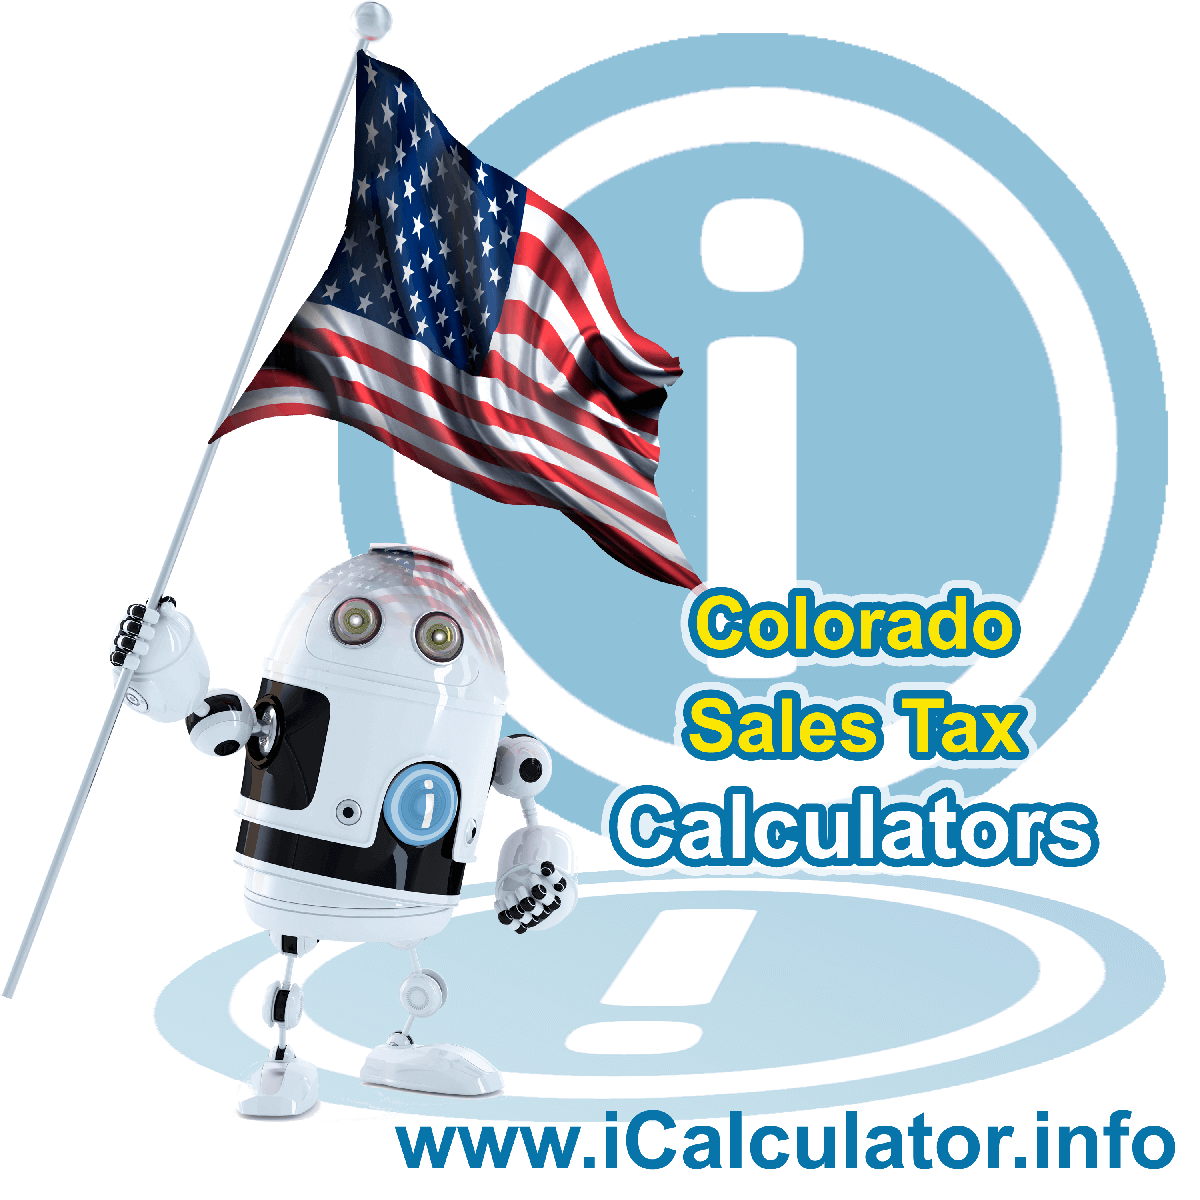 Evans Sales Rates: This image illustrates a calculator robot calculating Evans sales tax manually using the Evans Sales Tax Formula. You can use this information to calculate Evans Sales Tax manually or use the Evans Sales Tax Calculator to calculate sales tax online.